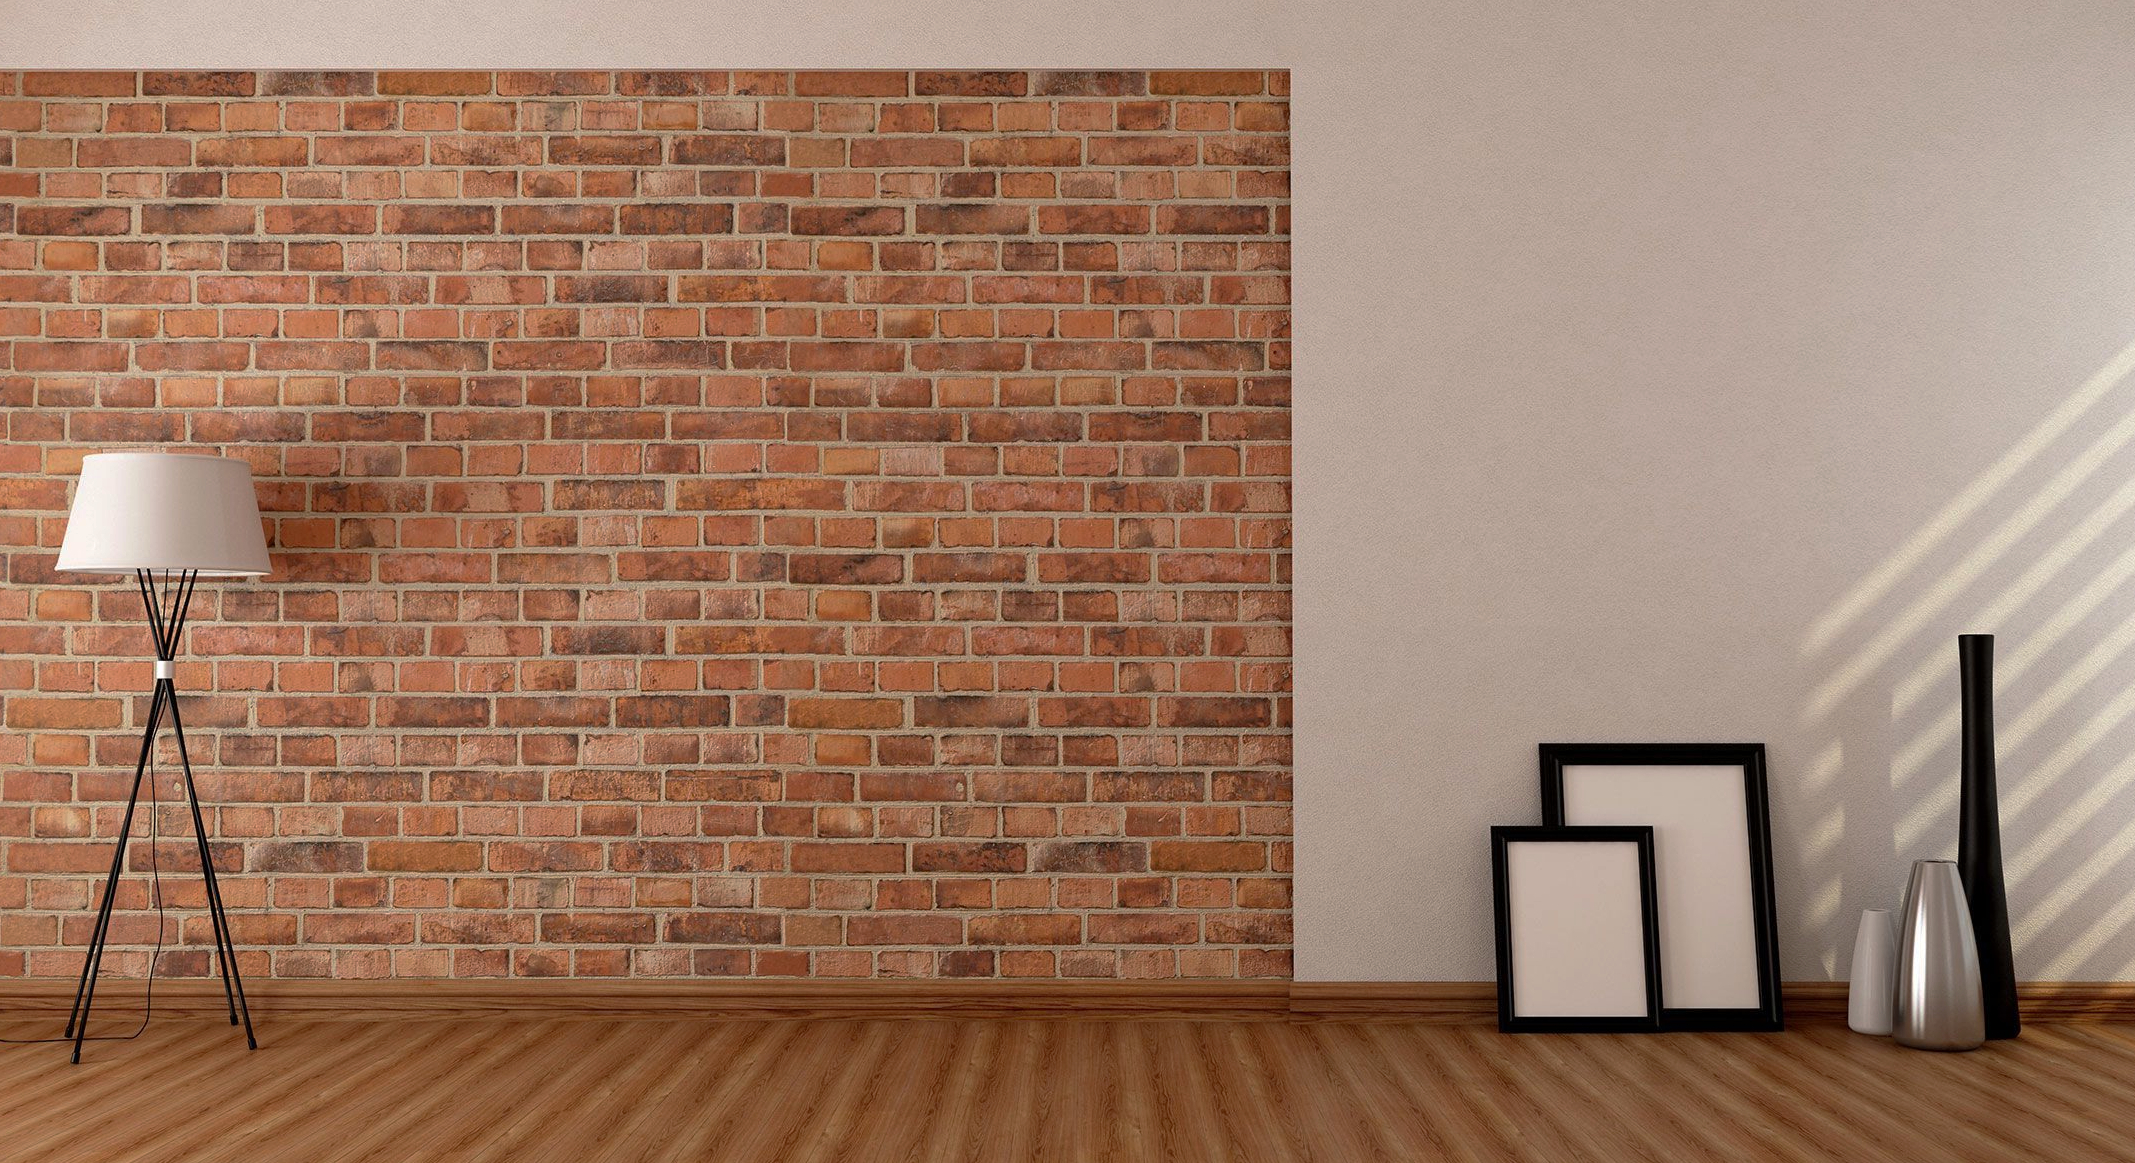 Is a plain brick wall a good idea for your home